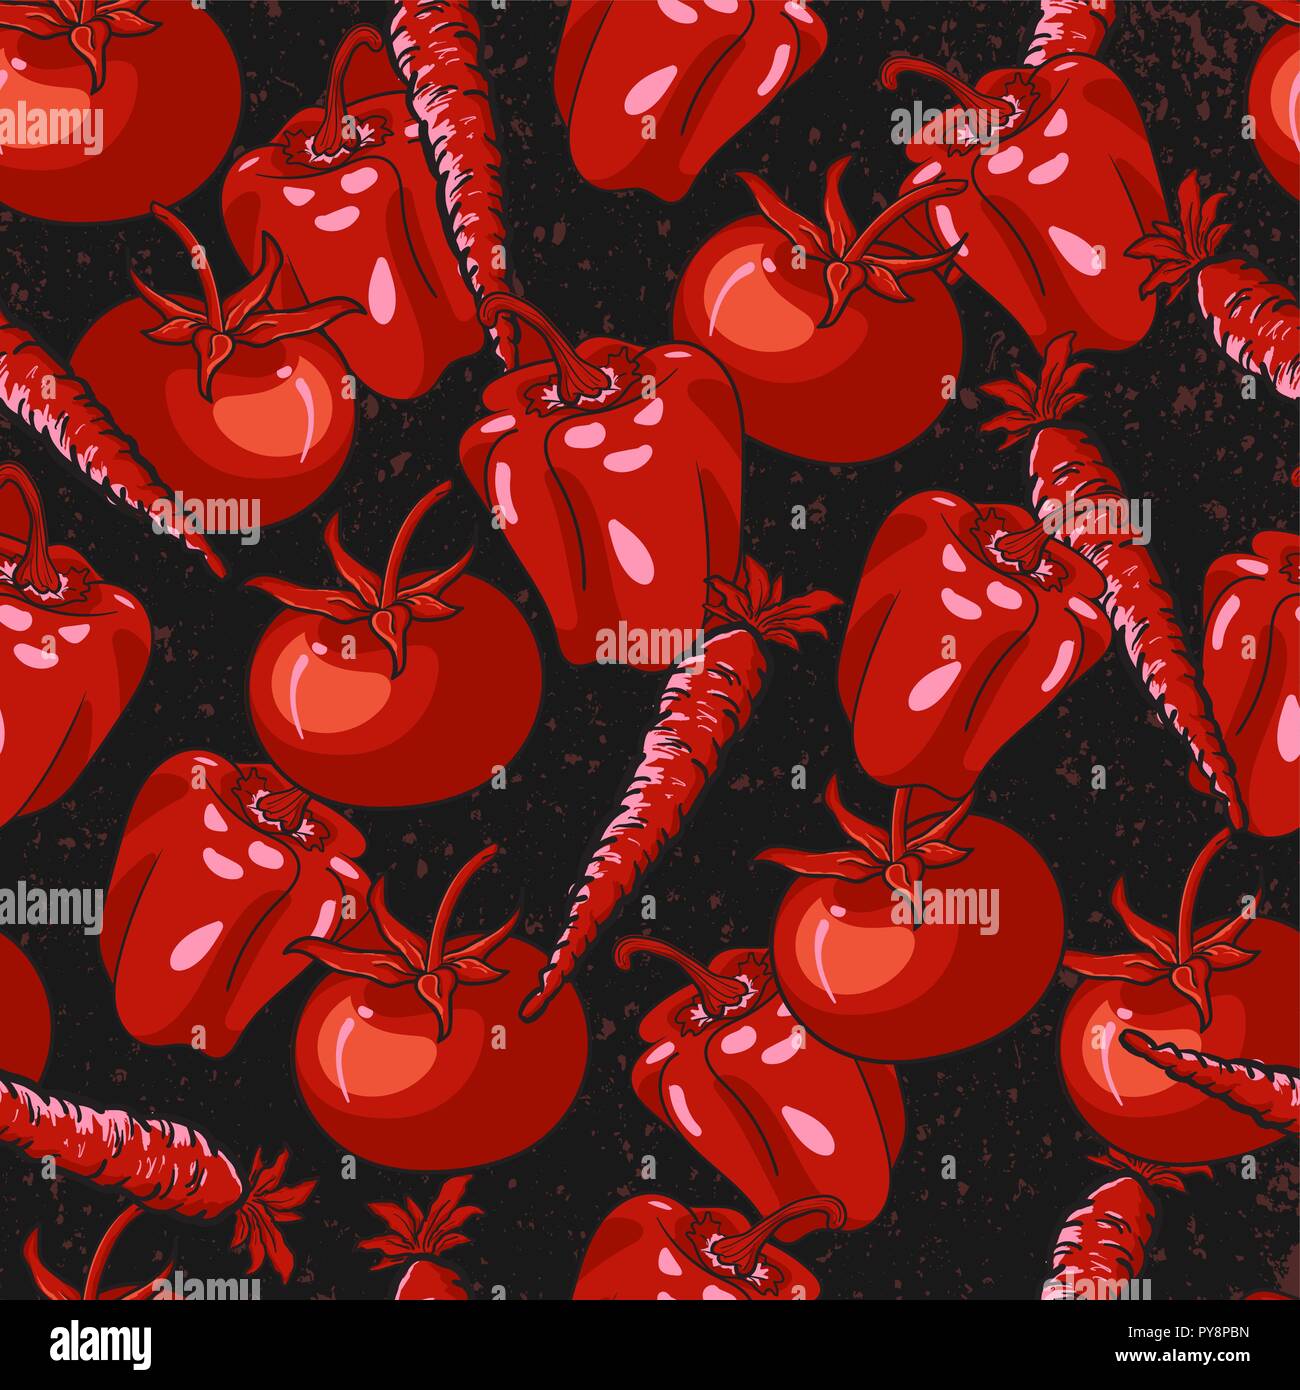 Red vegetables seamless pattern with black grunge background for wallpaper, texture, fabric, textile, and surface design Stock Vector